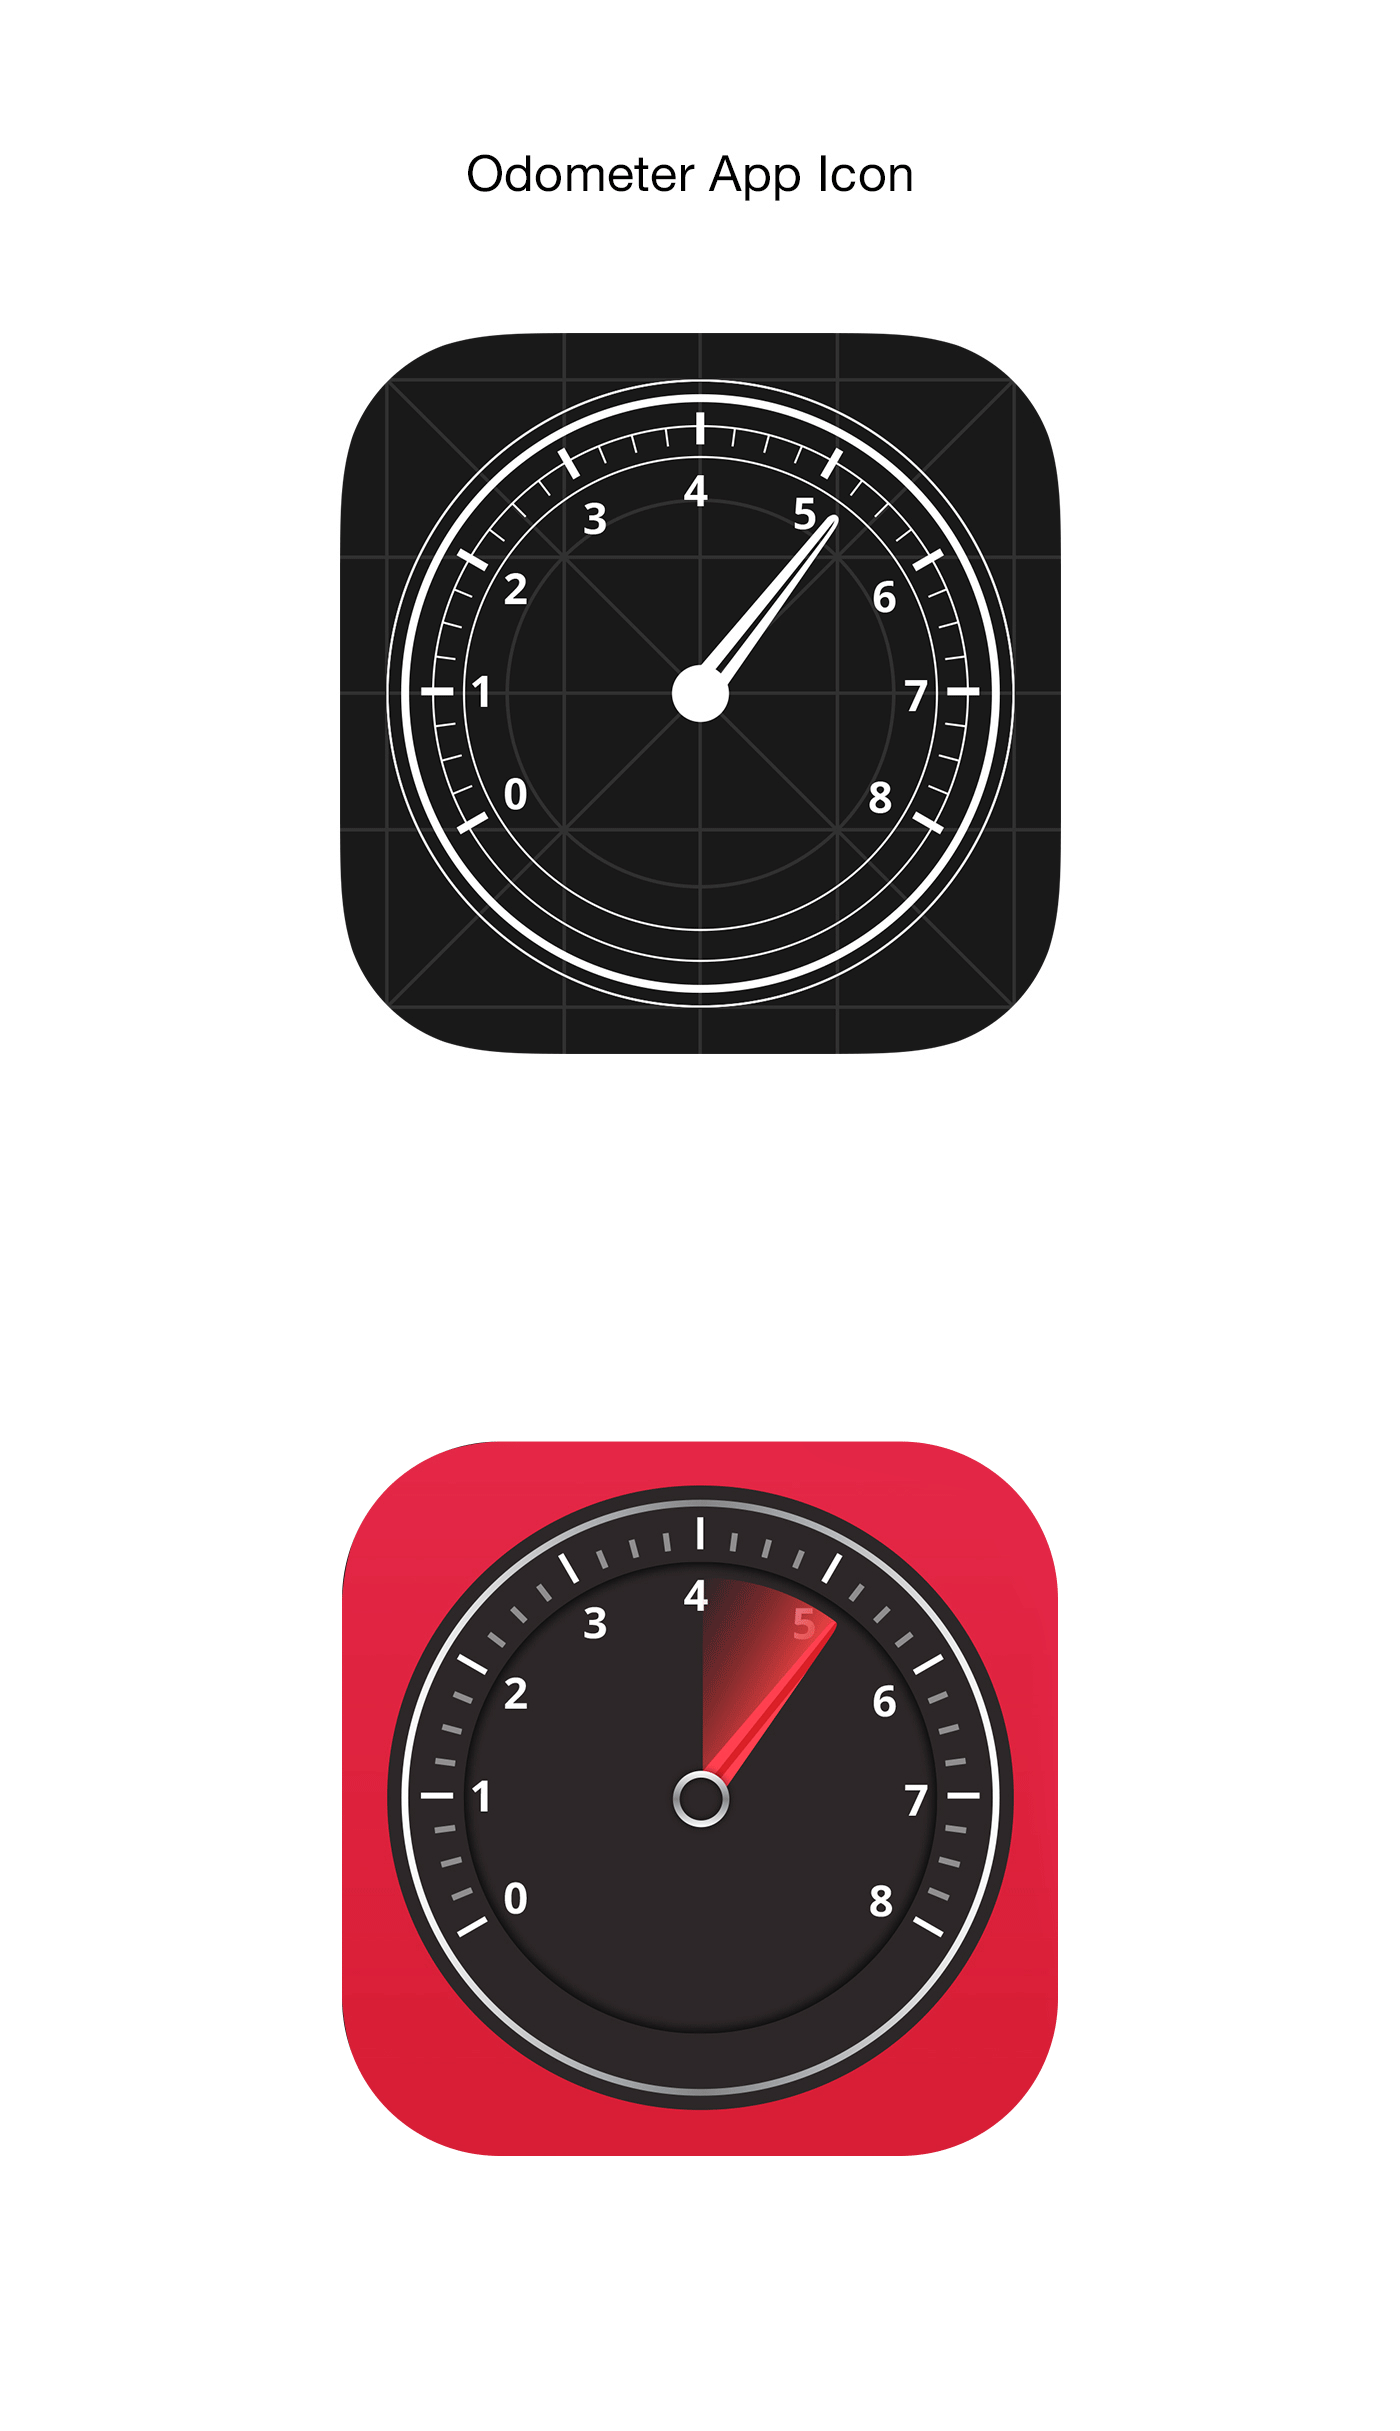 Odometer App Icon Design by AlfredoCreates